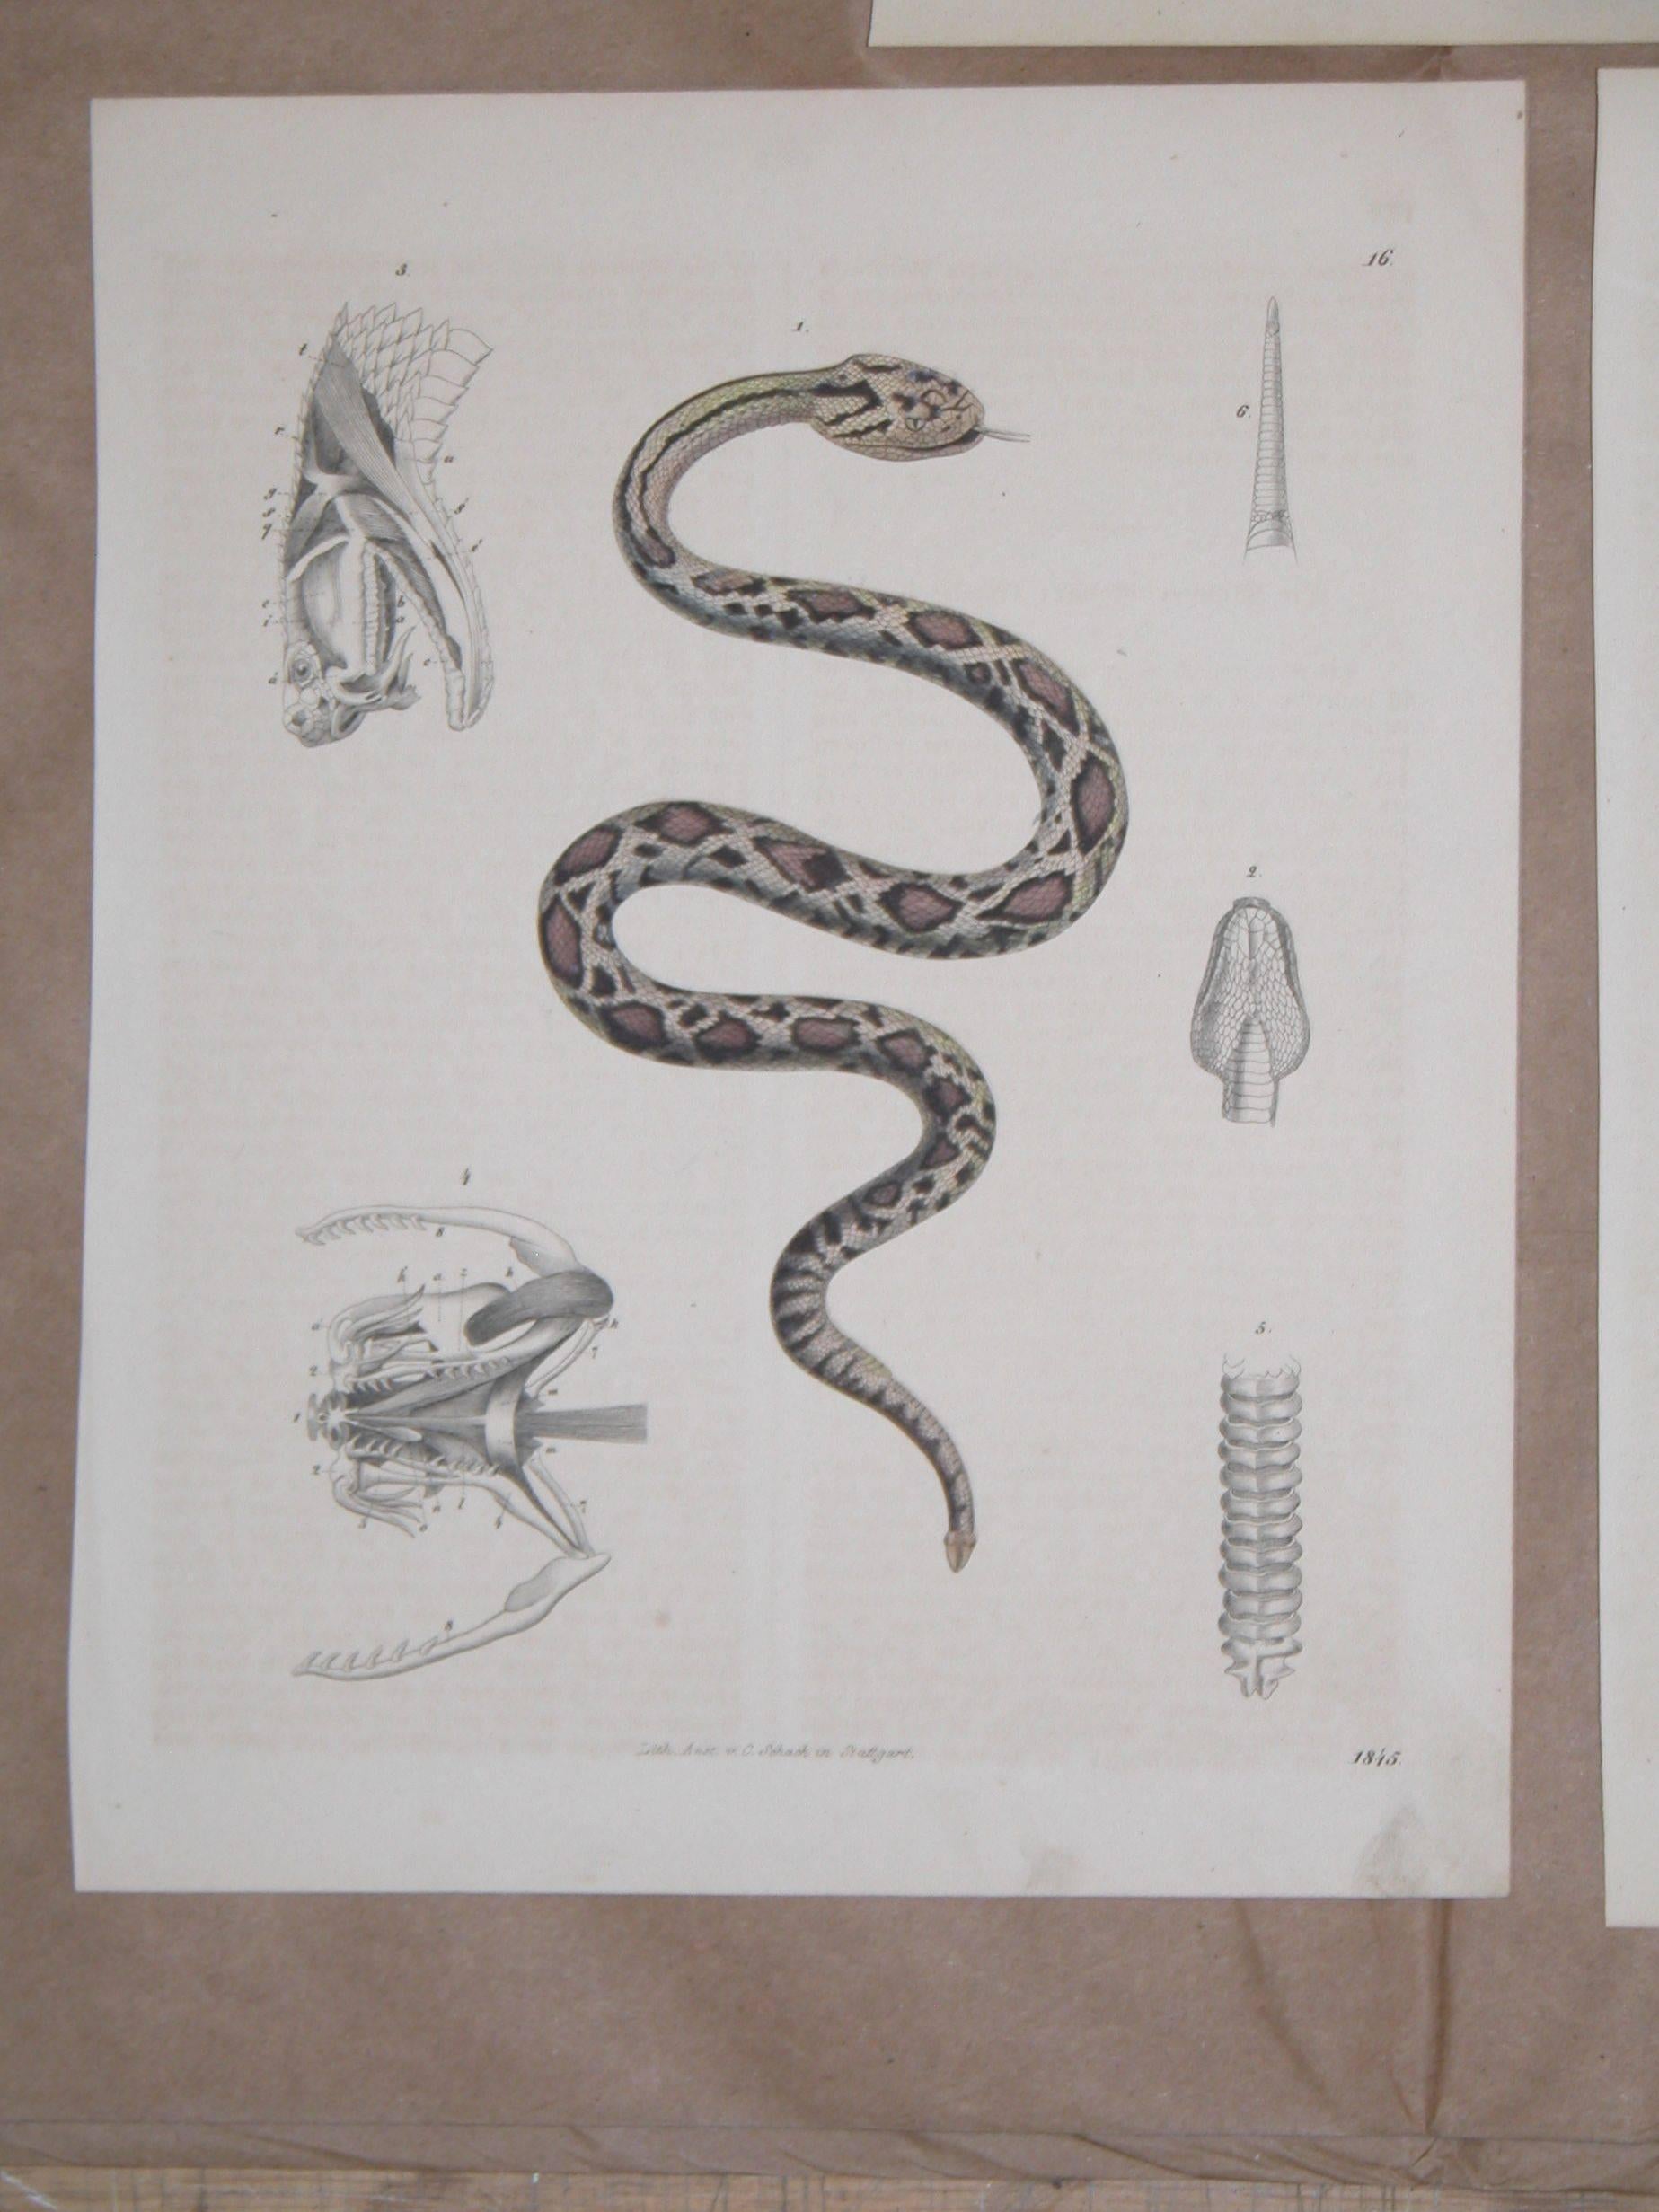 Early Victorian Set of Three Mid-19th Century Prints of Snakes by Anst. V. C. Schach, Germany